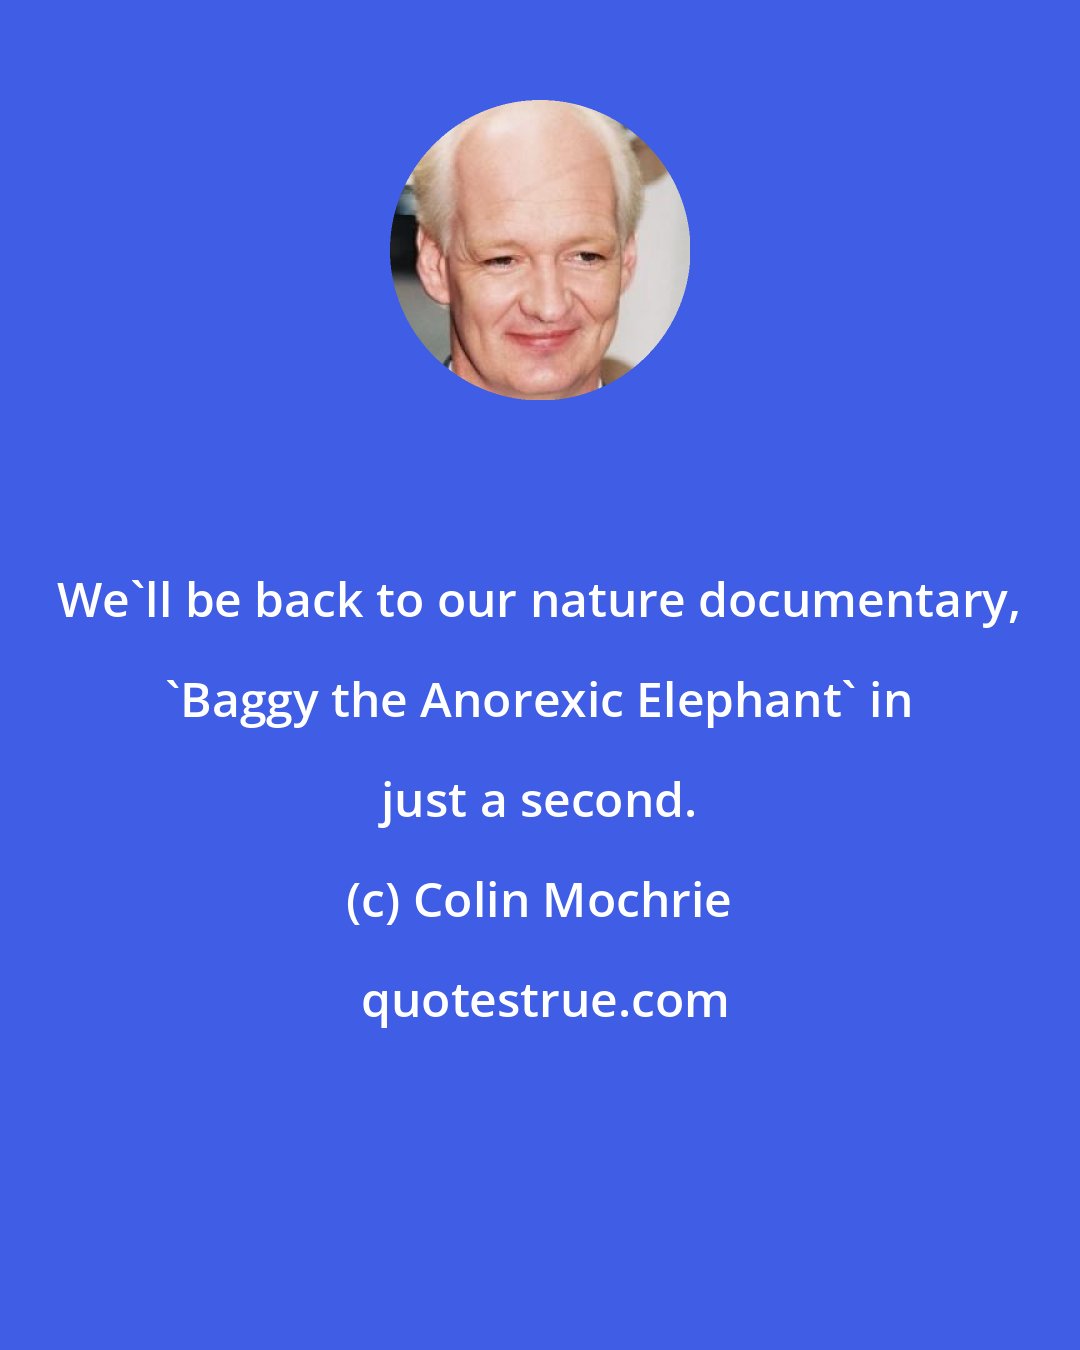 Colin Mochrie: We'll be back to our nature documentary, 'Baggy the Anorexic Elephant' in just a second.